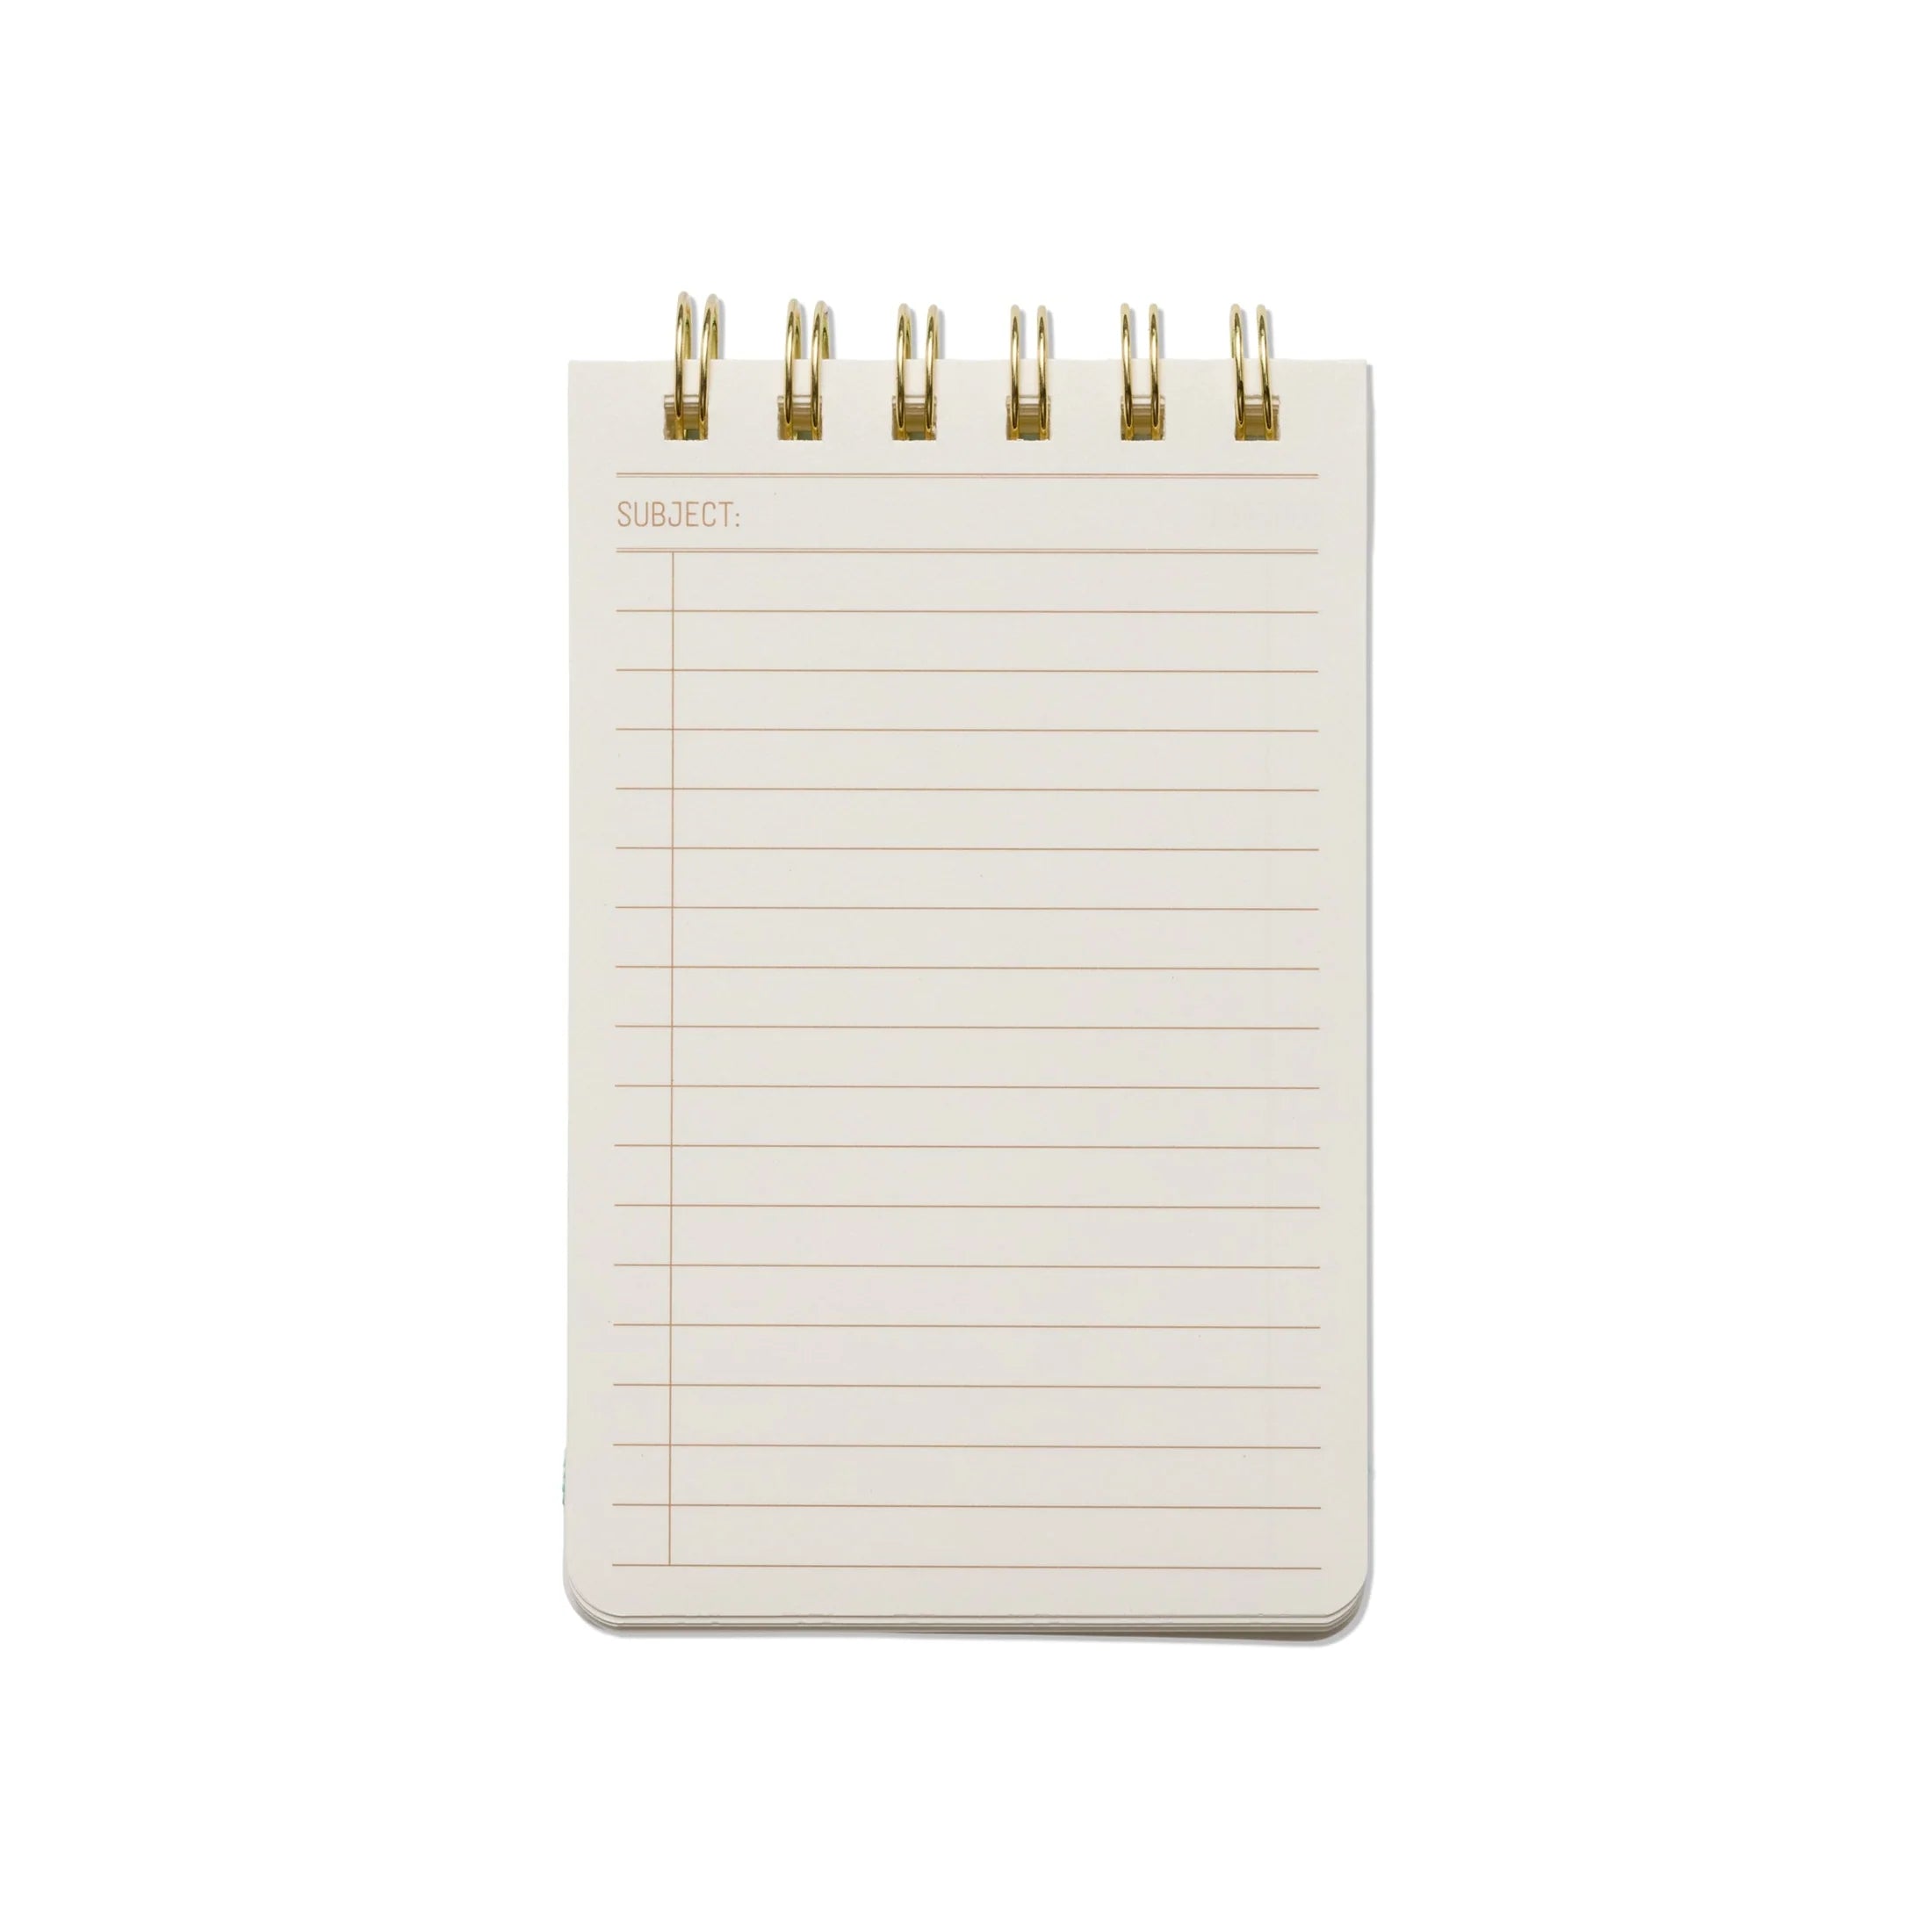 Fabulous Gifts Gentlemens Hardware Vintage Sass Twin Wire Notepad - Free Hugs by Weirs of Baggot Street